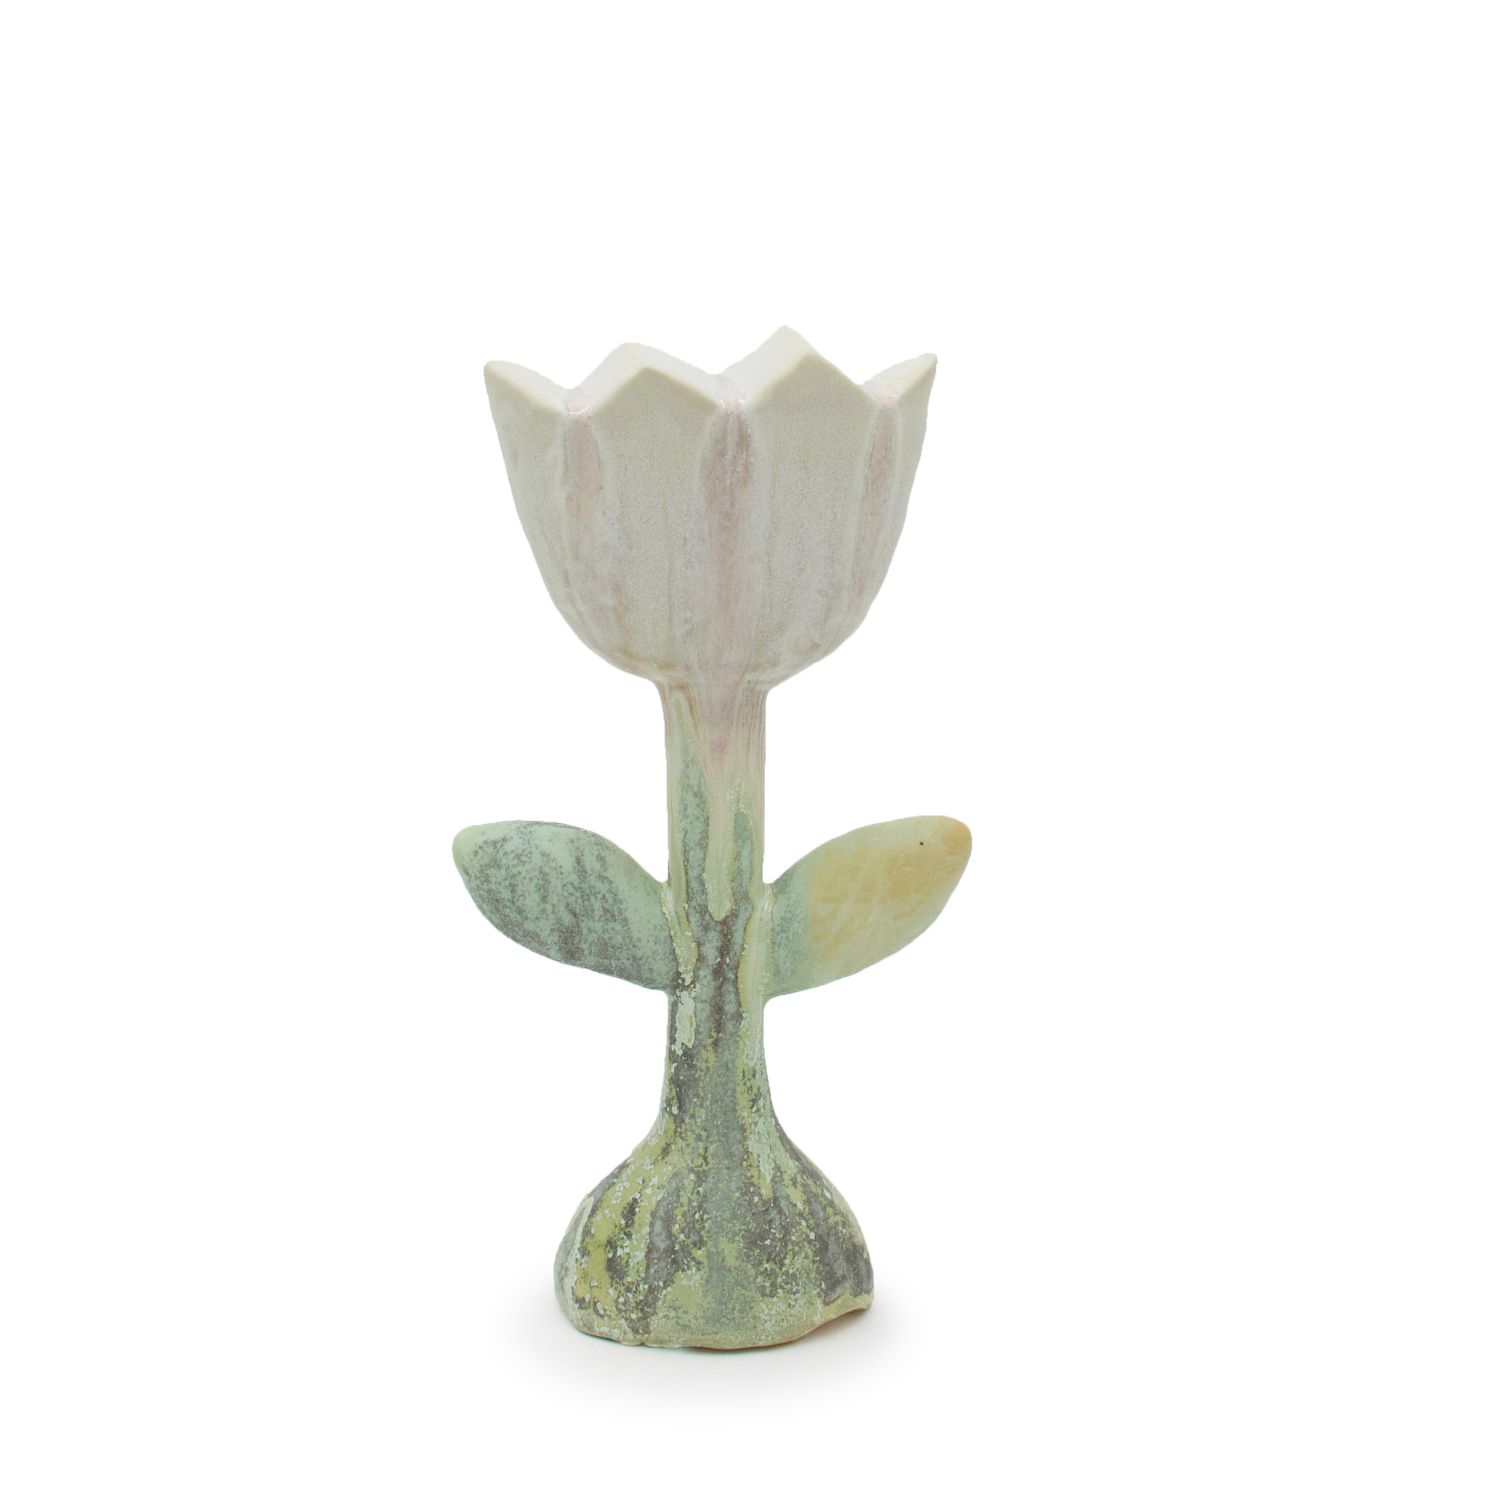 Julie Moon: Angled Top Tulip Product Image 1 of 3